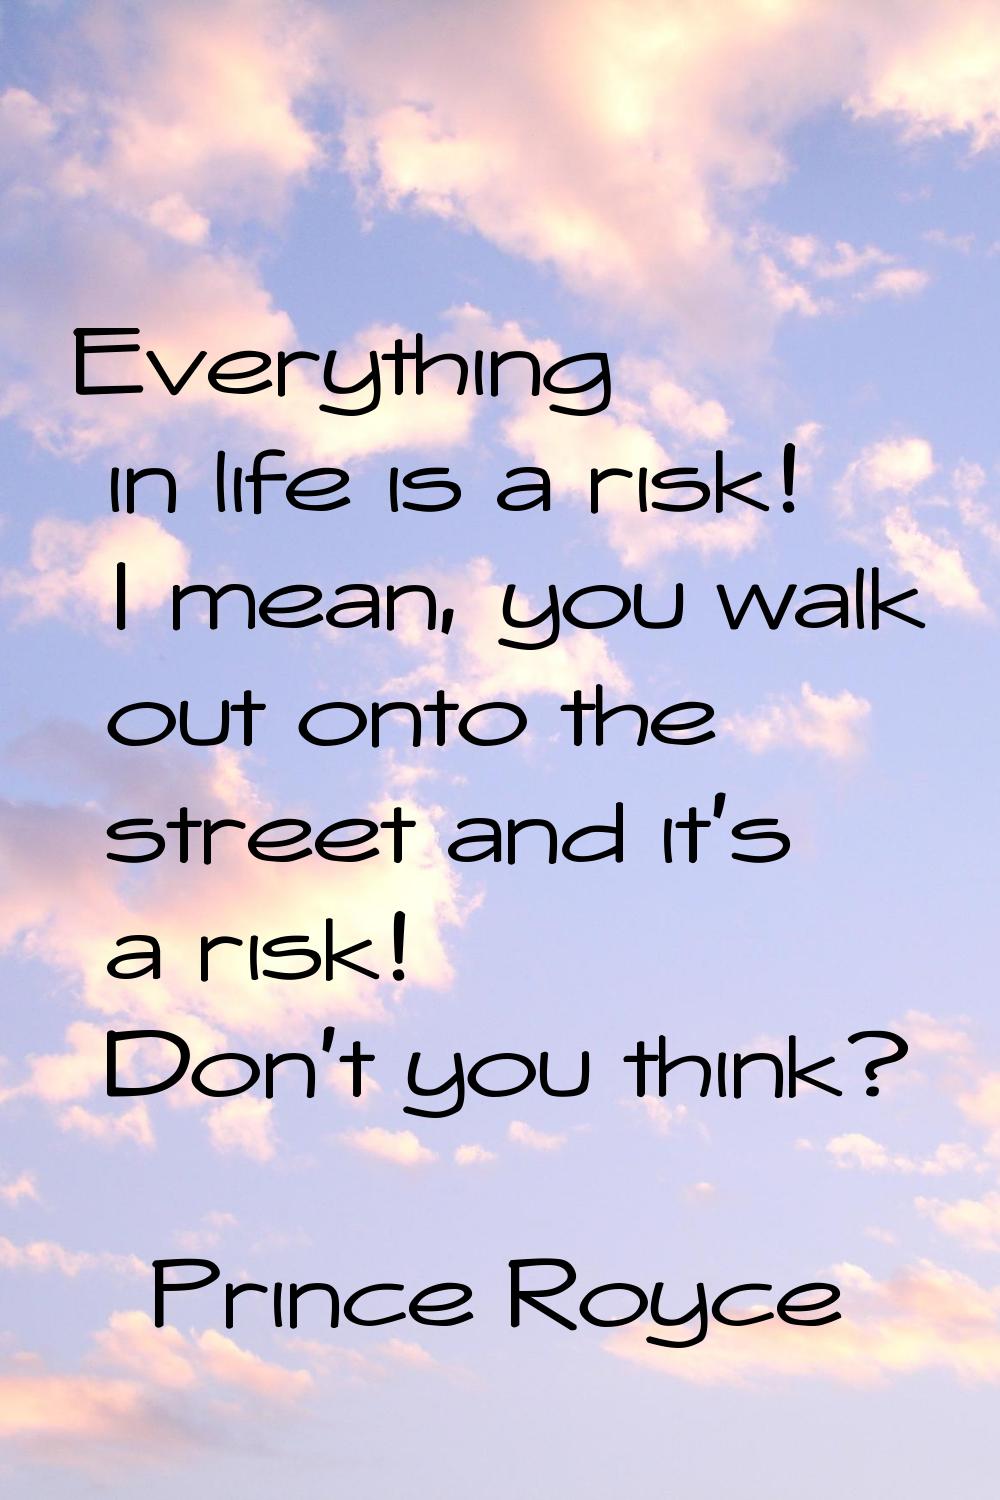 Everything in life is a risk! I mean, you walk out onto the street and it's a risk! Don't you think